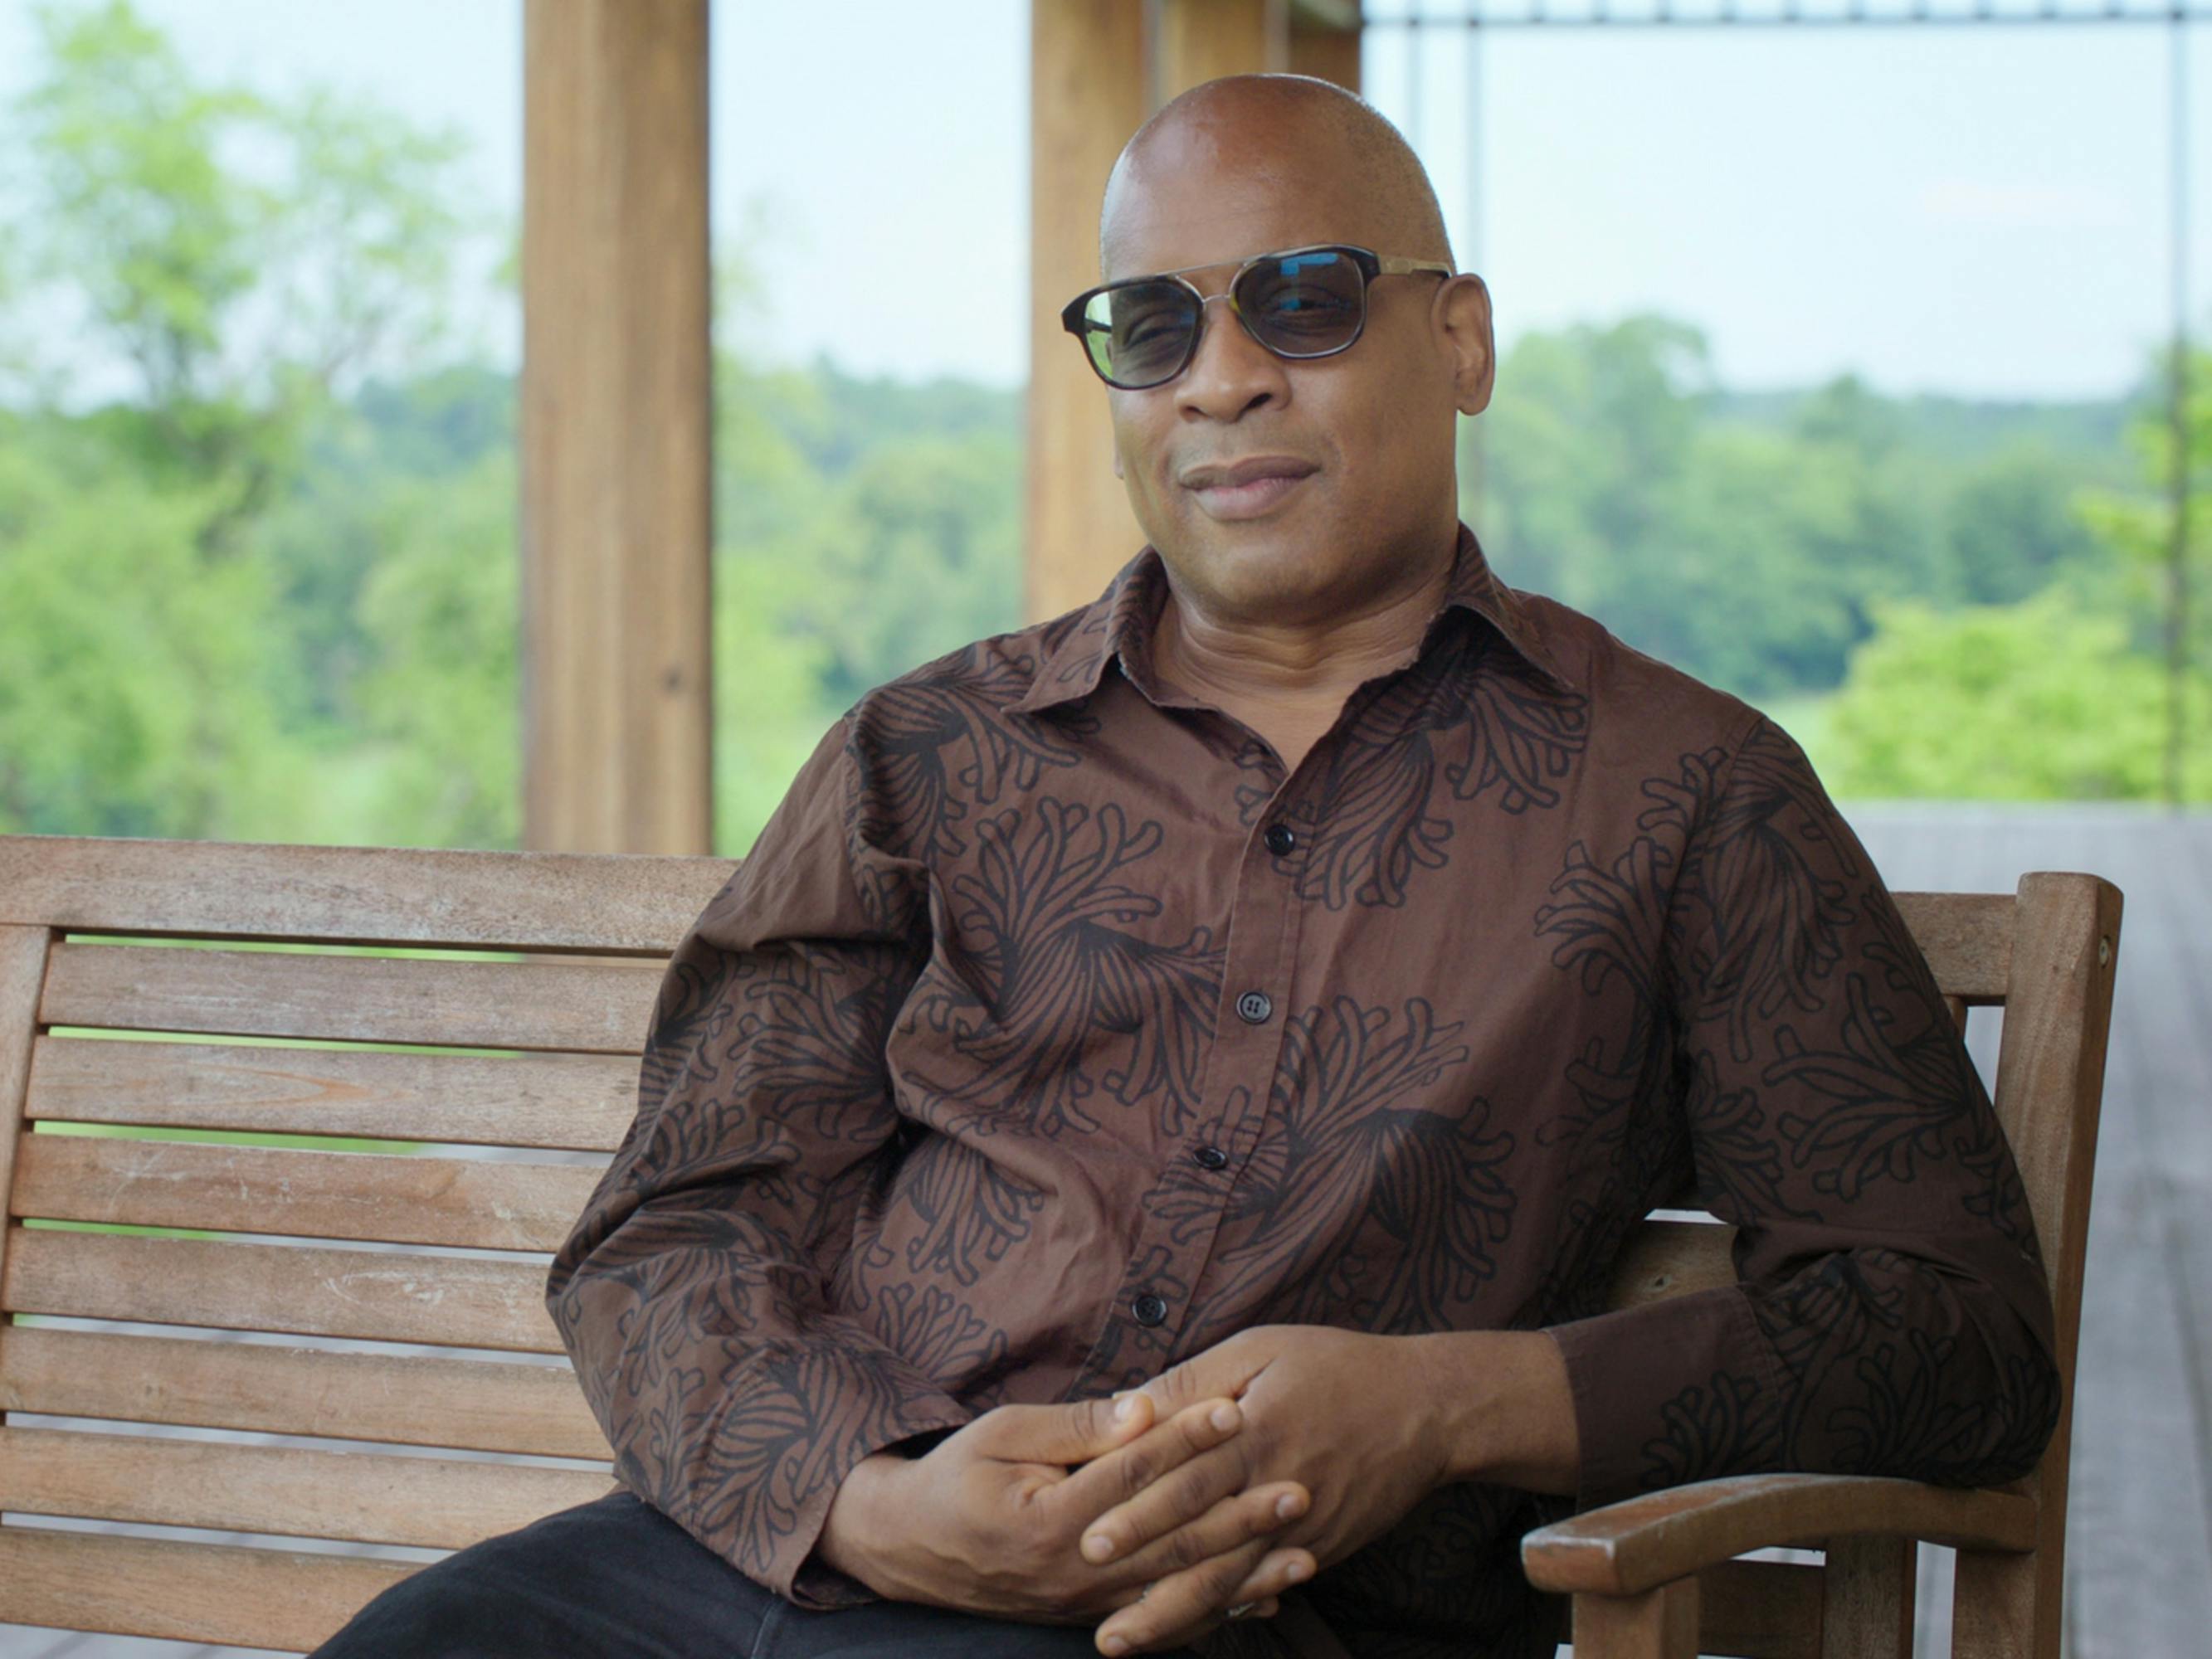 Glenn Ligon wears a brown shirt and shades and sits on a sunny porch, on a wooden bench.